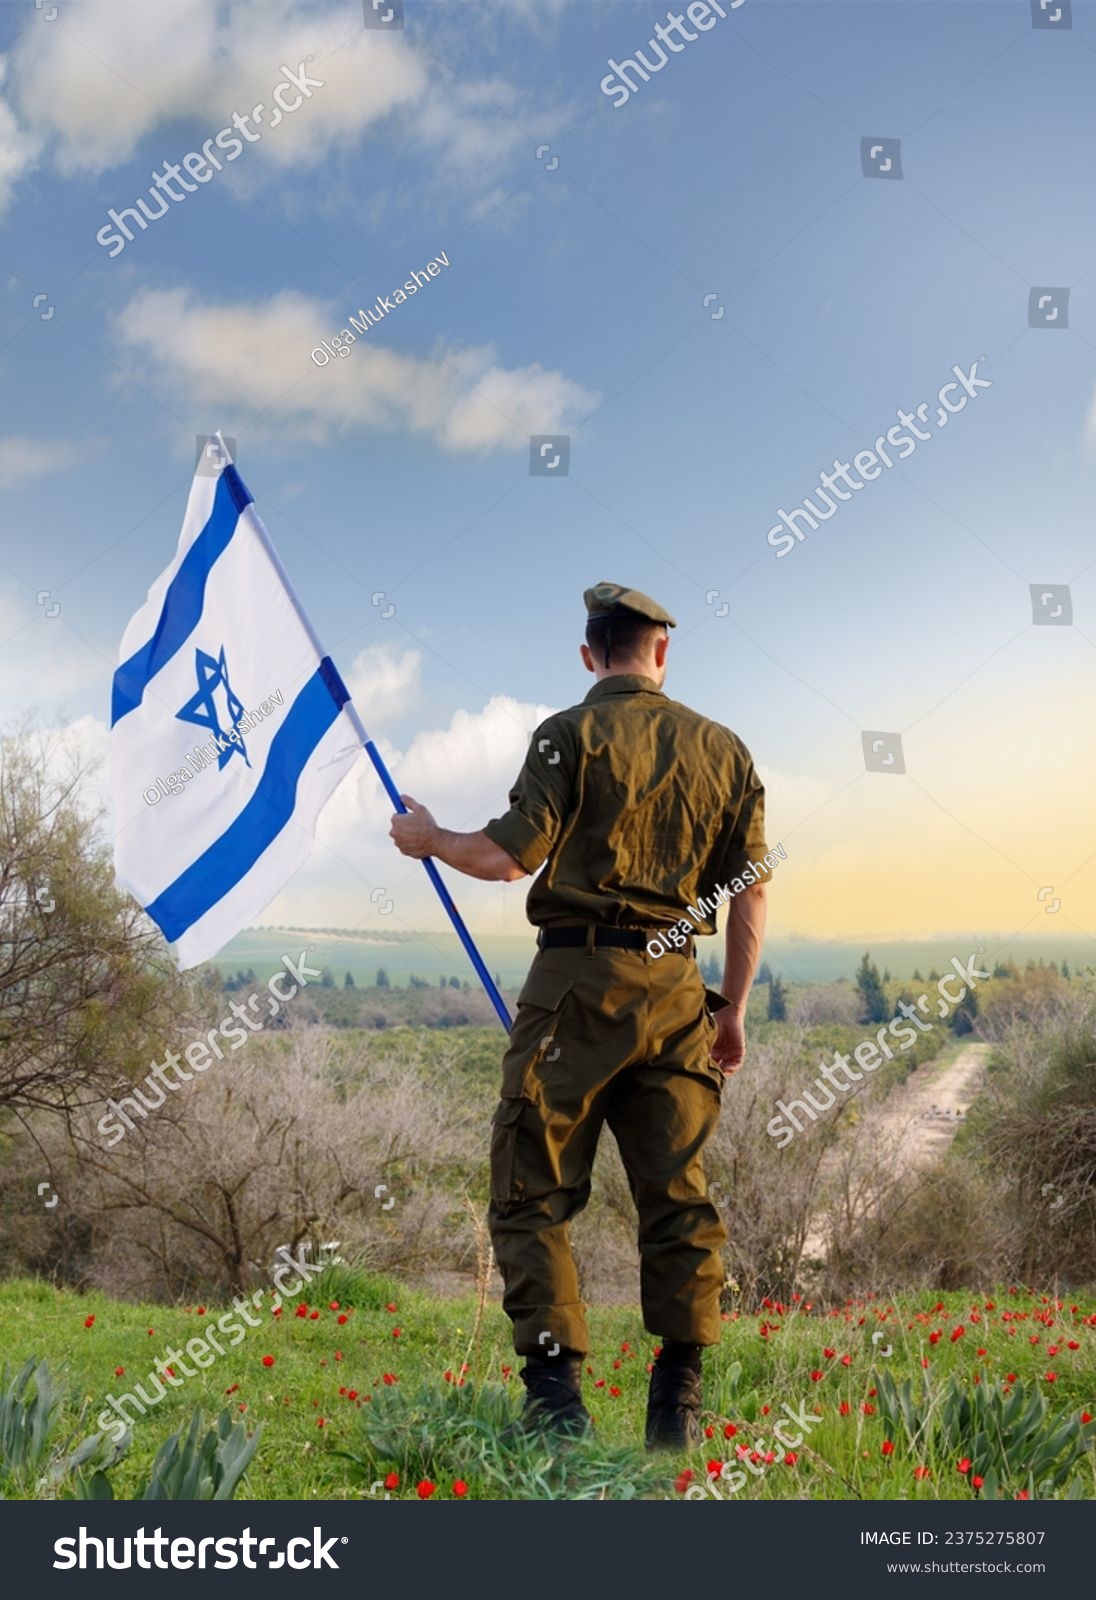 Israeli soldier with Israel flag against the sunset in the blooming desert. Concept - armed forces of Israel. #2375275807